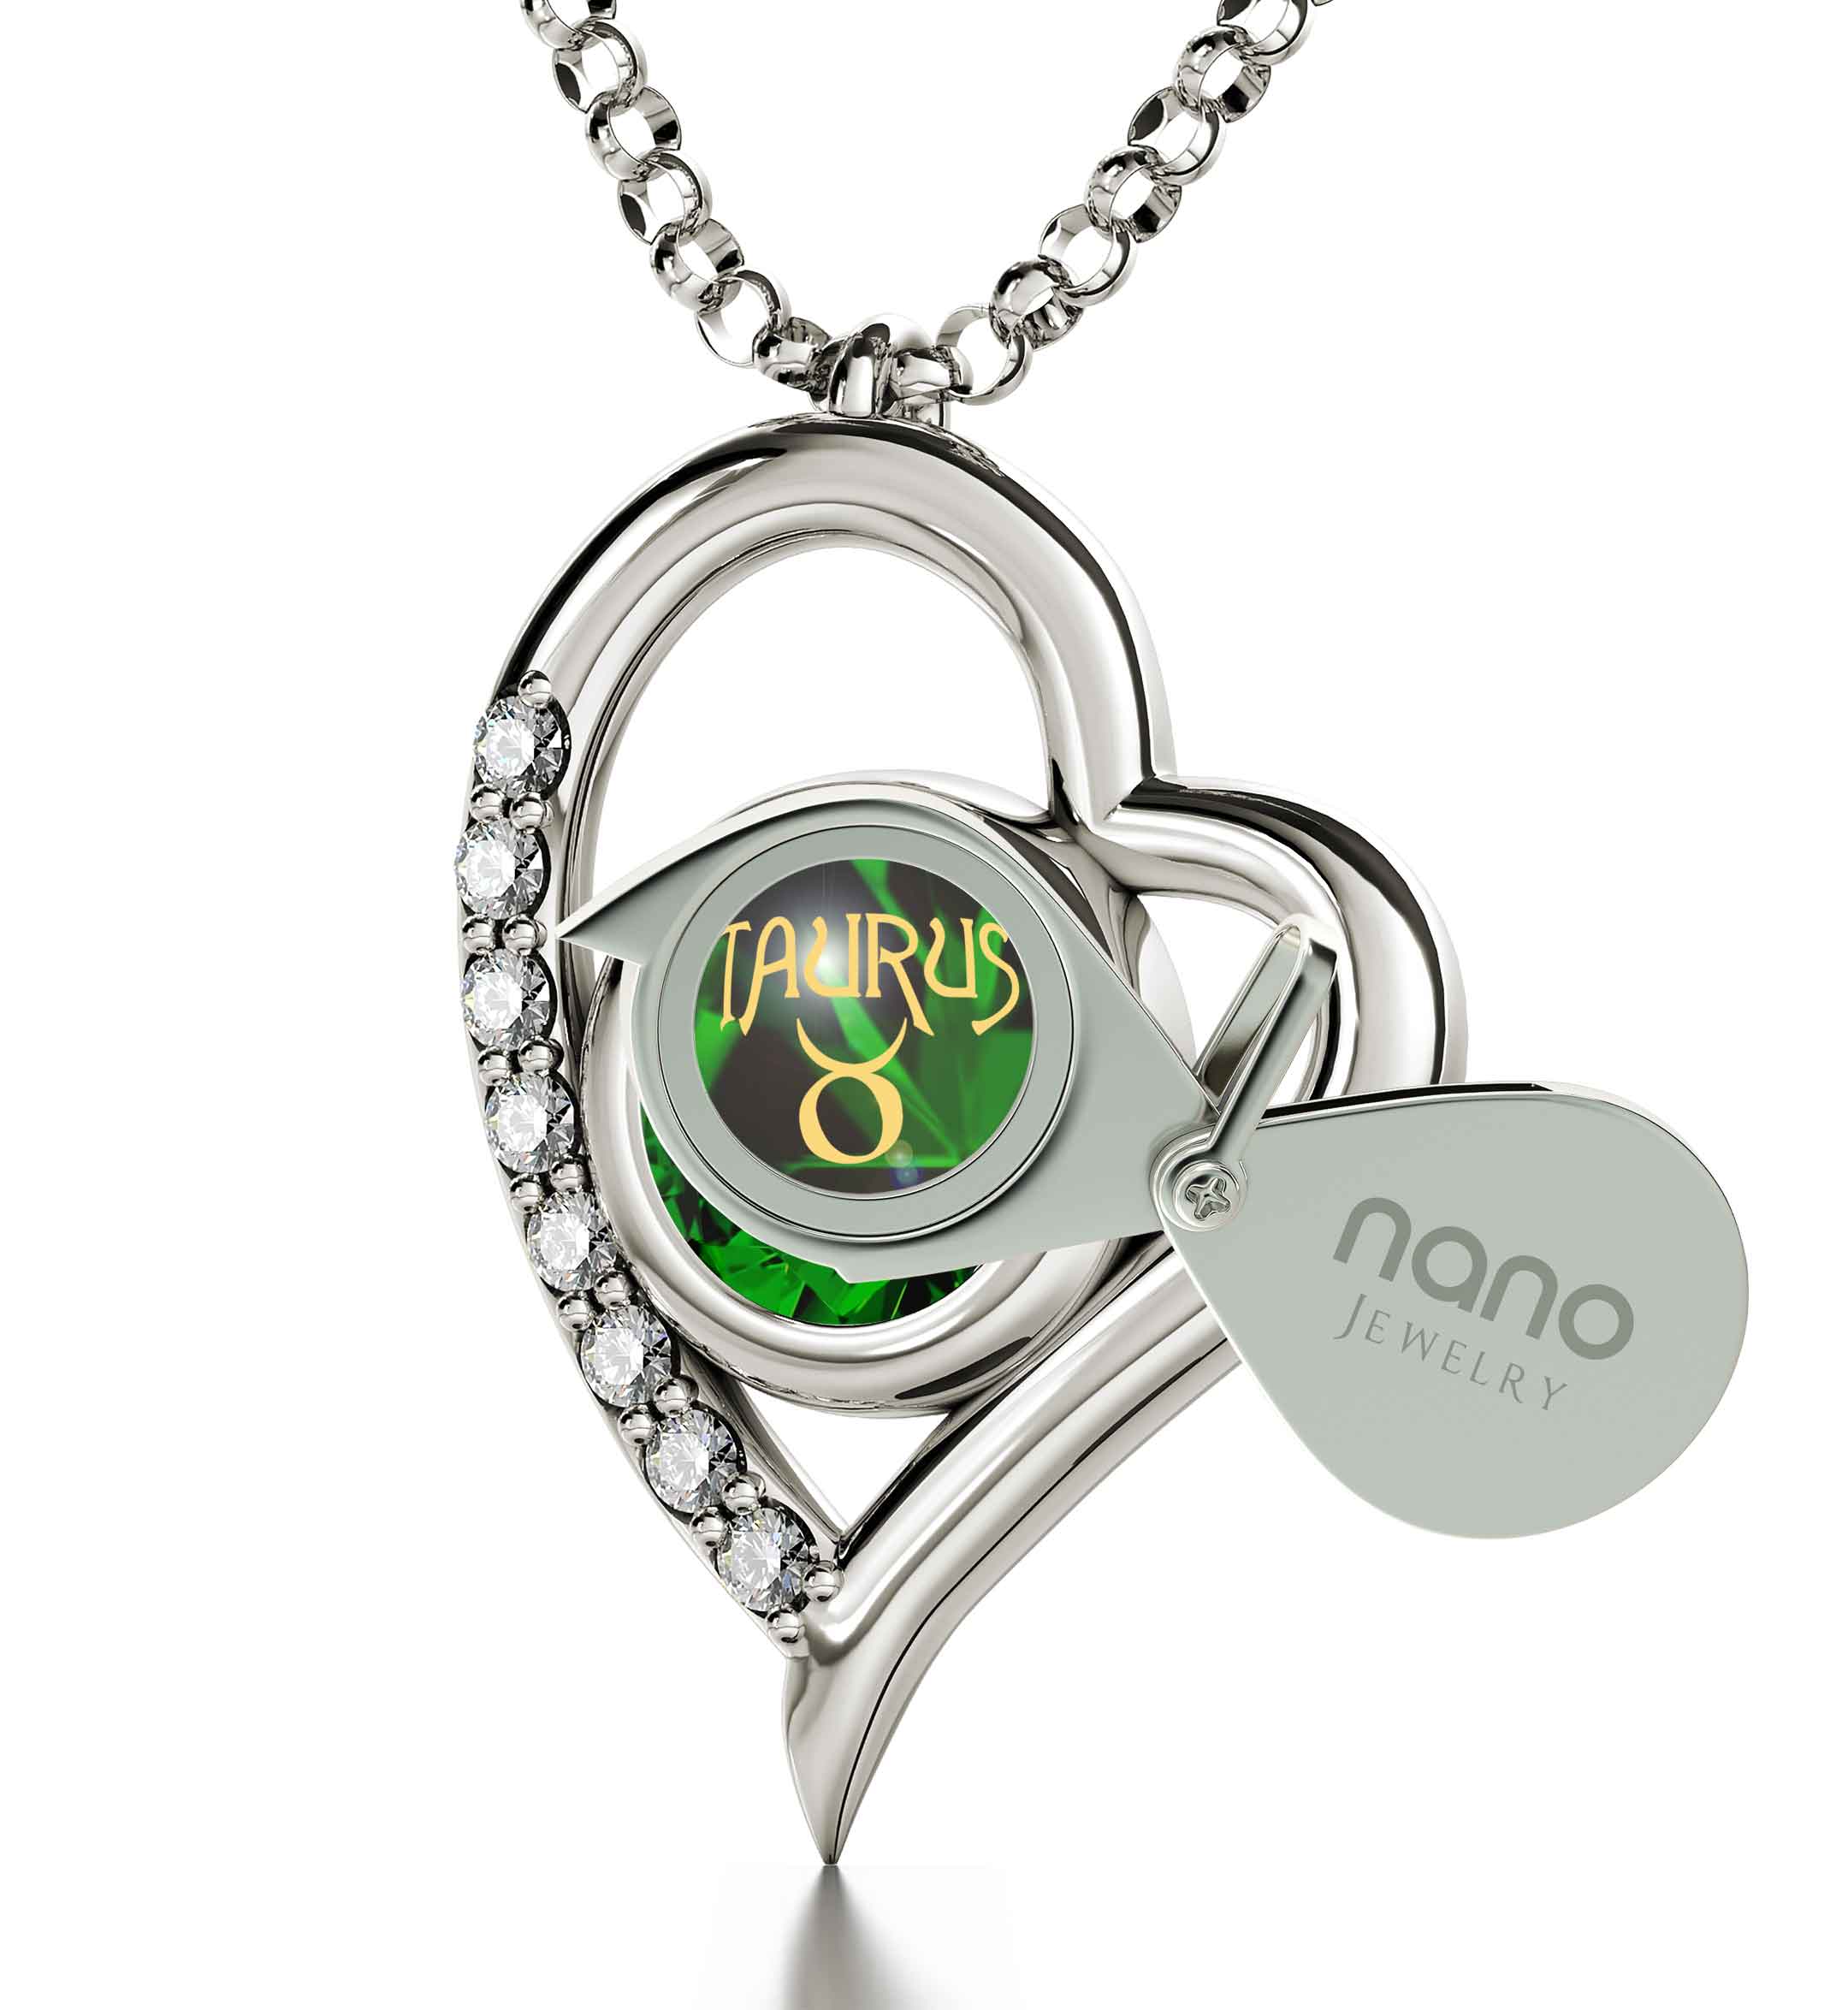 Close-up of a 925 Sterling Silver Taurus Necklace Zodiac Heart Pendant 24k Gold Inscribed on Crystal depicted in gold on a green geometric background, set in a silver ring encrusted with diamonds and featuring Taurus zodiac jewelry elements.